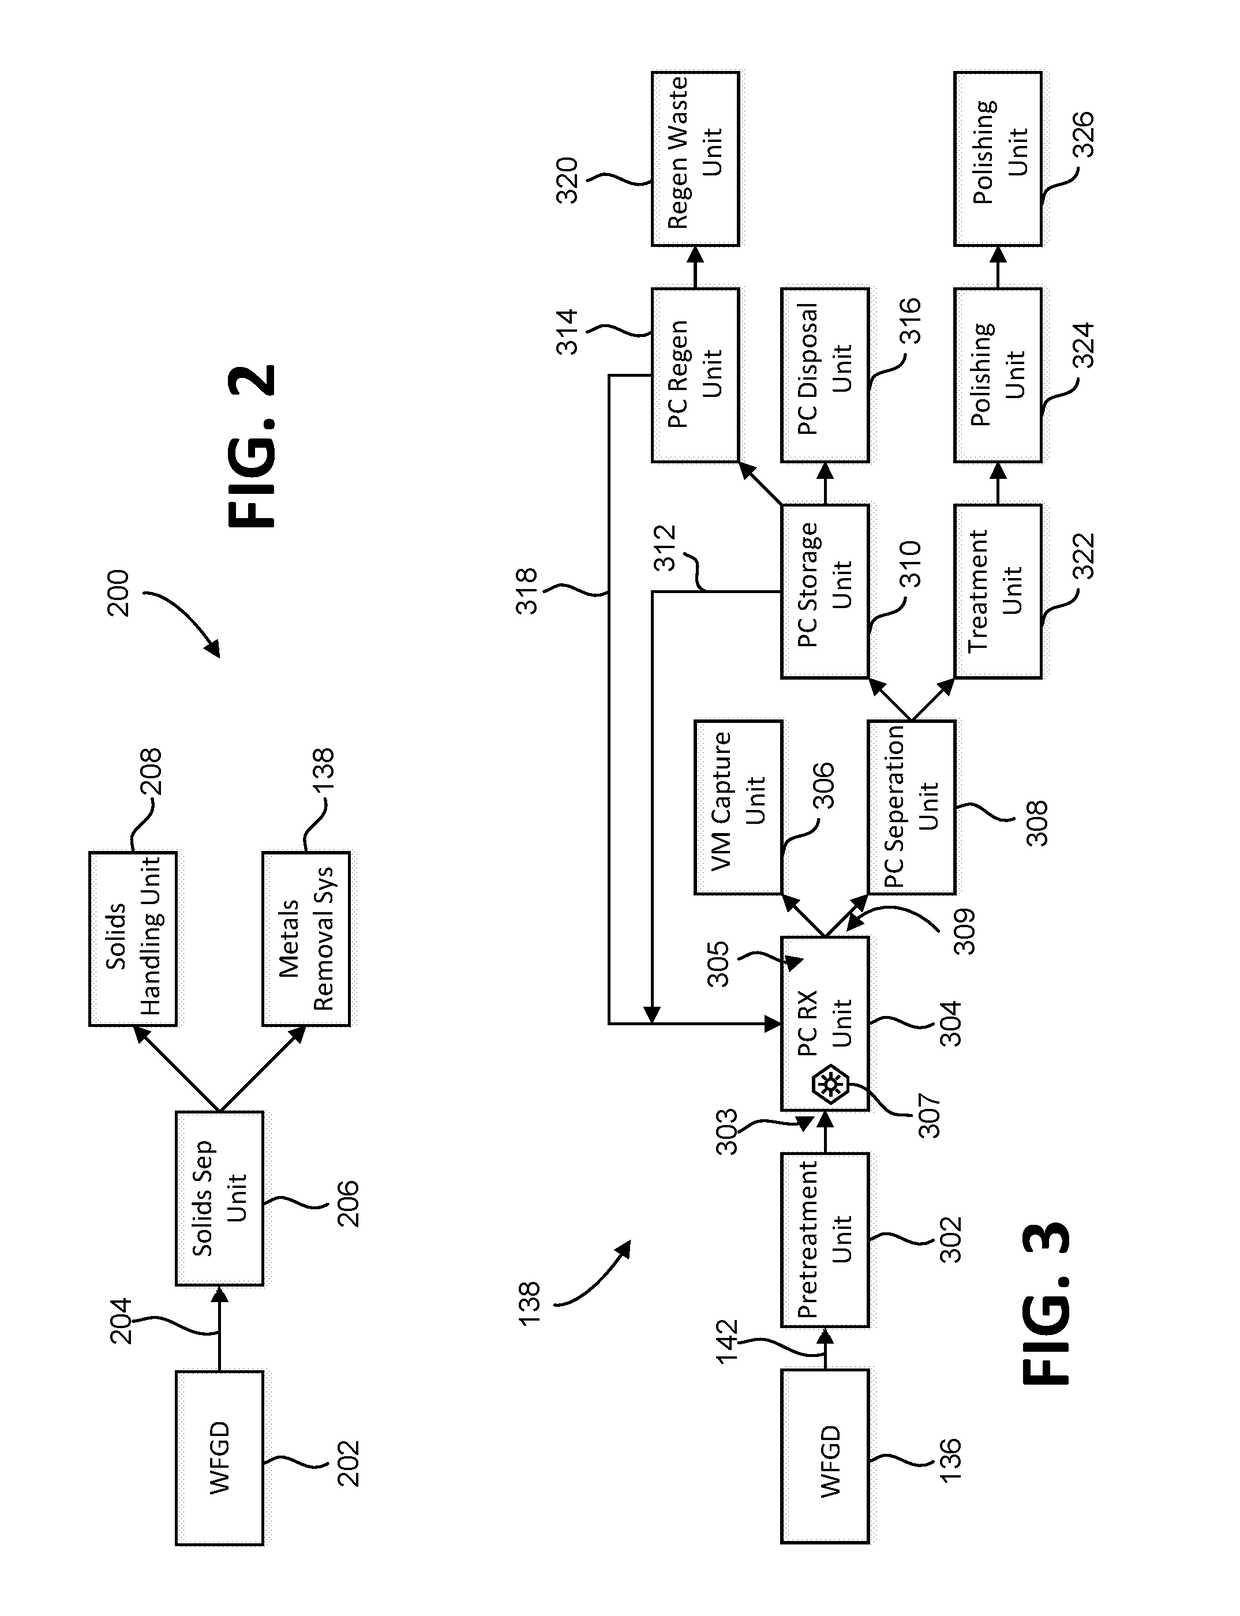 System and methods for removing dissolved metals from wastewater streams